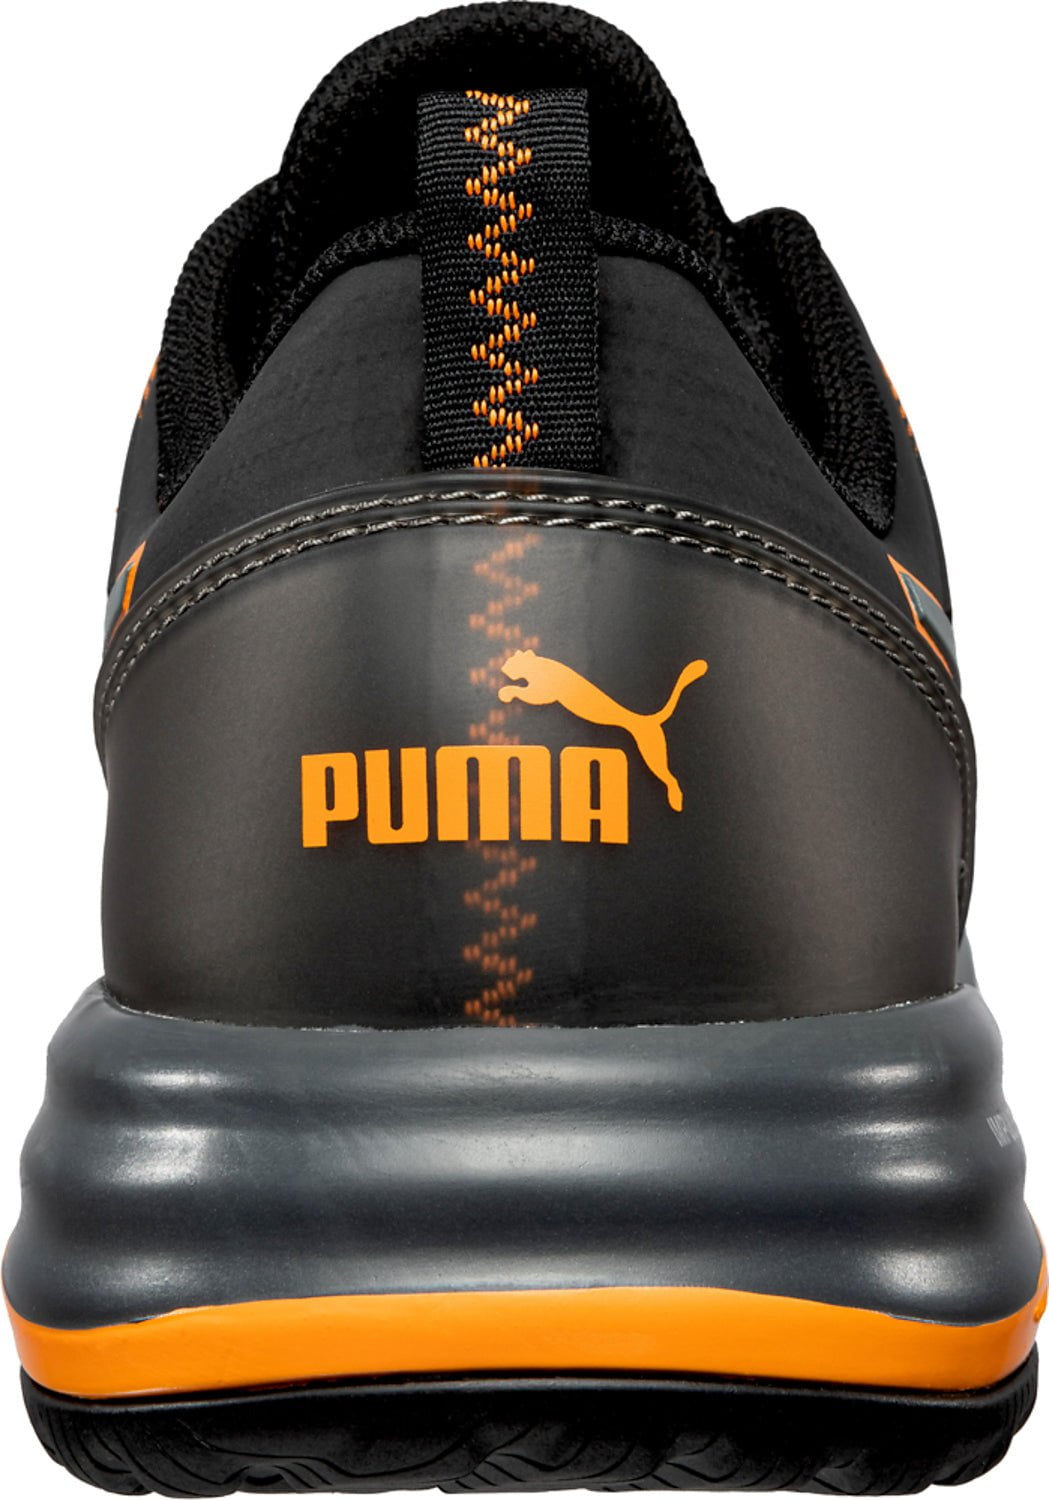 Western Safety Company Mens CT EH Mesh The – Puma Orange/Black Charge Work Shoes Low